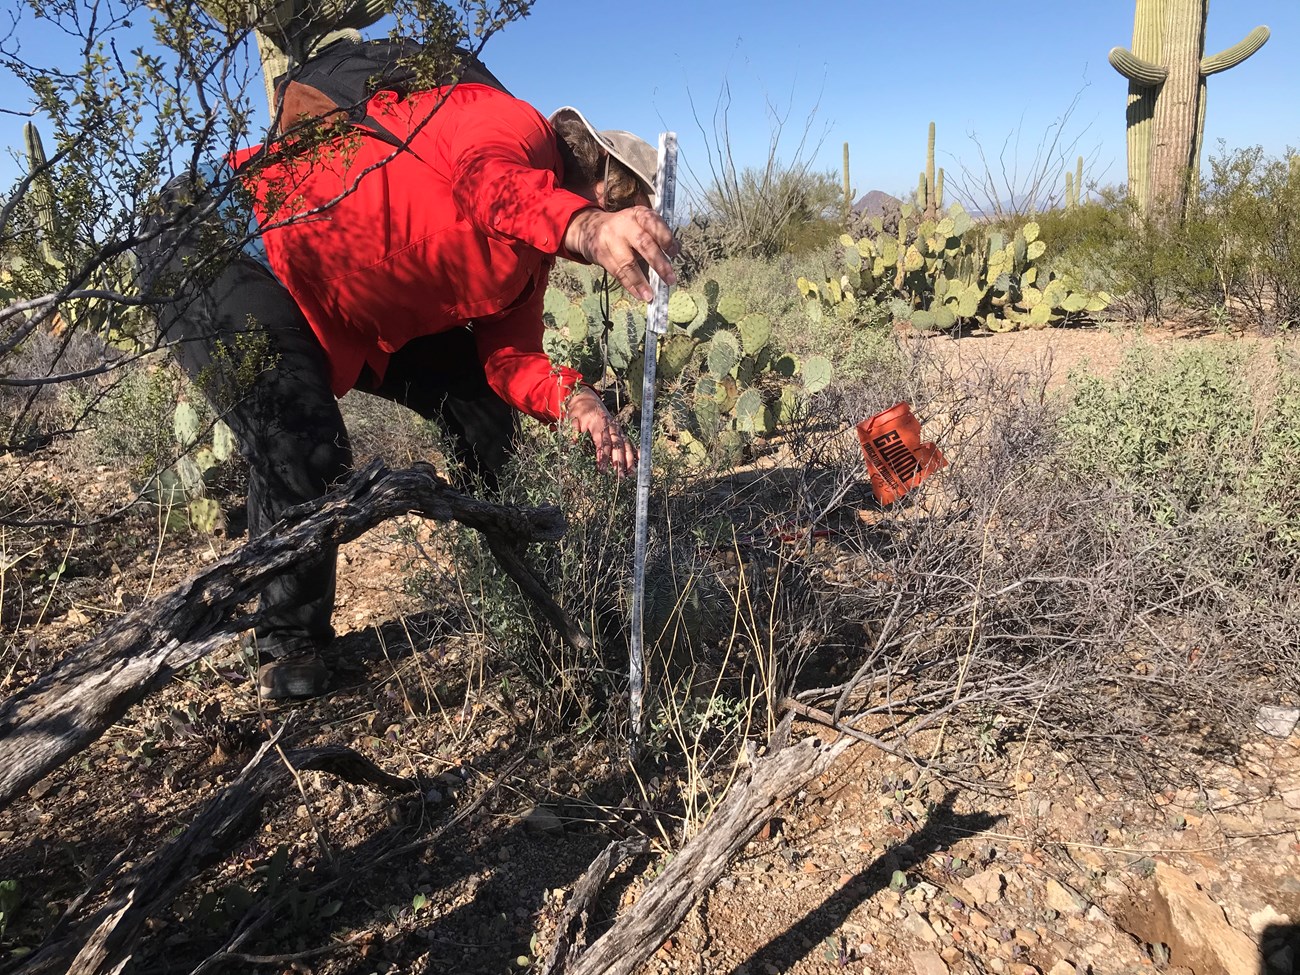 A woman measuring the height of a small saguaro with an orange flag.